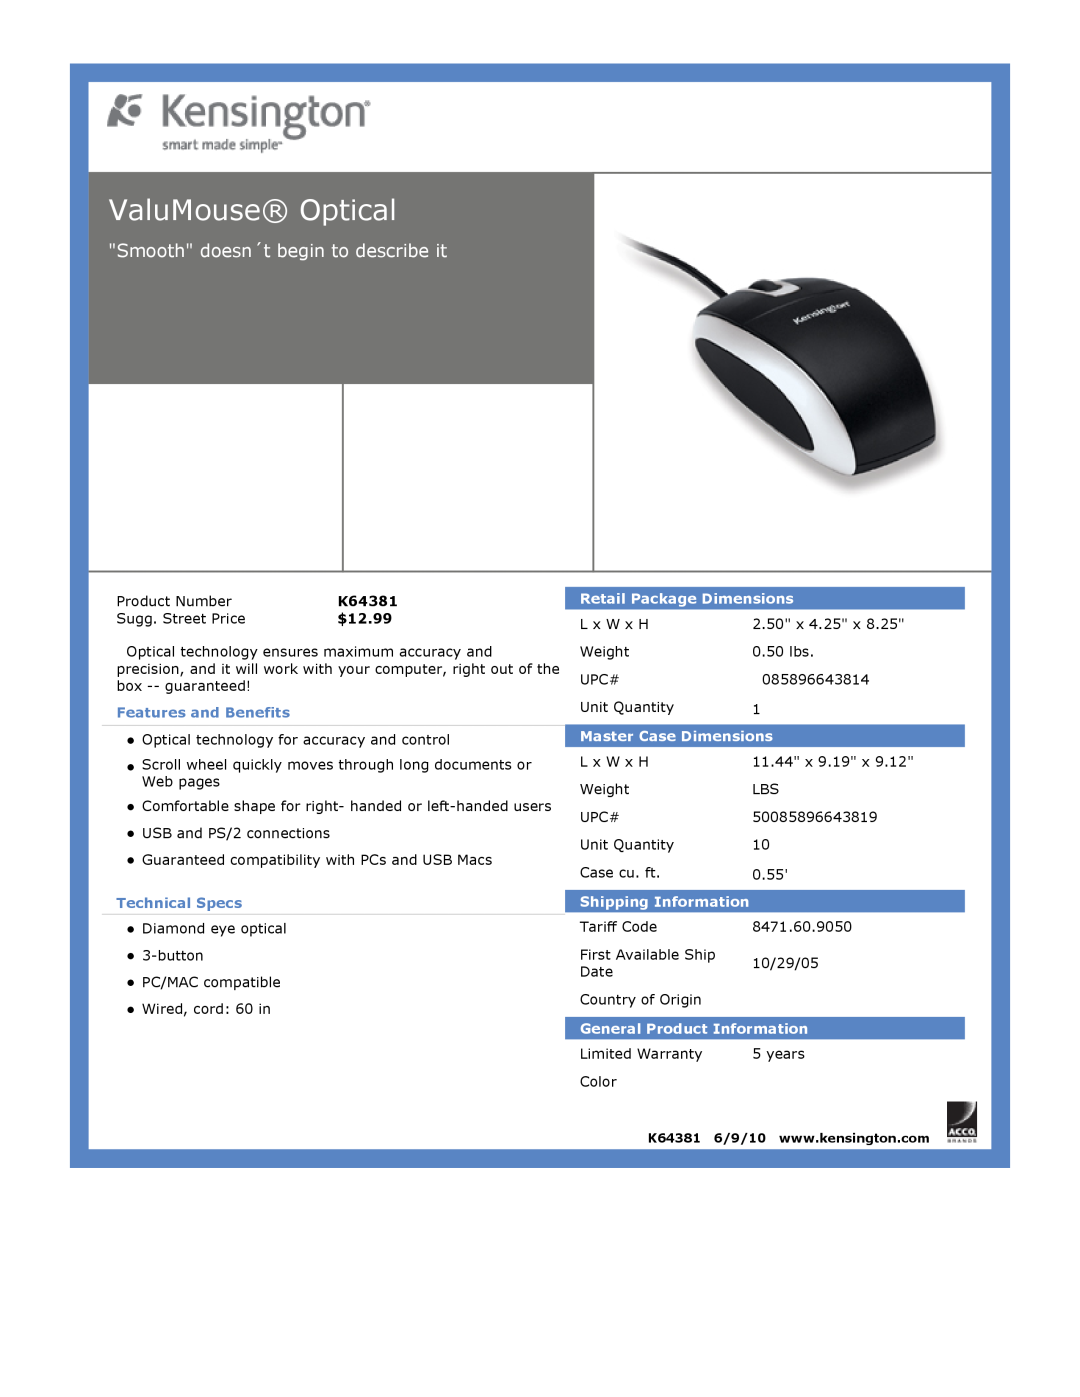 Kensington EU64325 ValuMouse Optical, Smooth doesn´t begin to describe it, $12.99, Features and Benefits, Technical Specs 